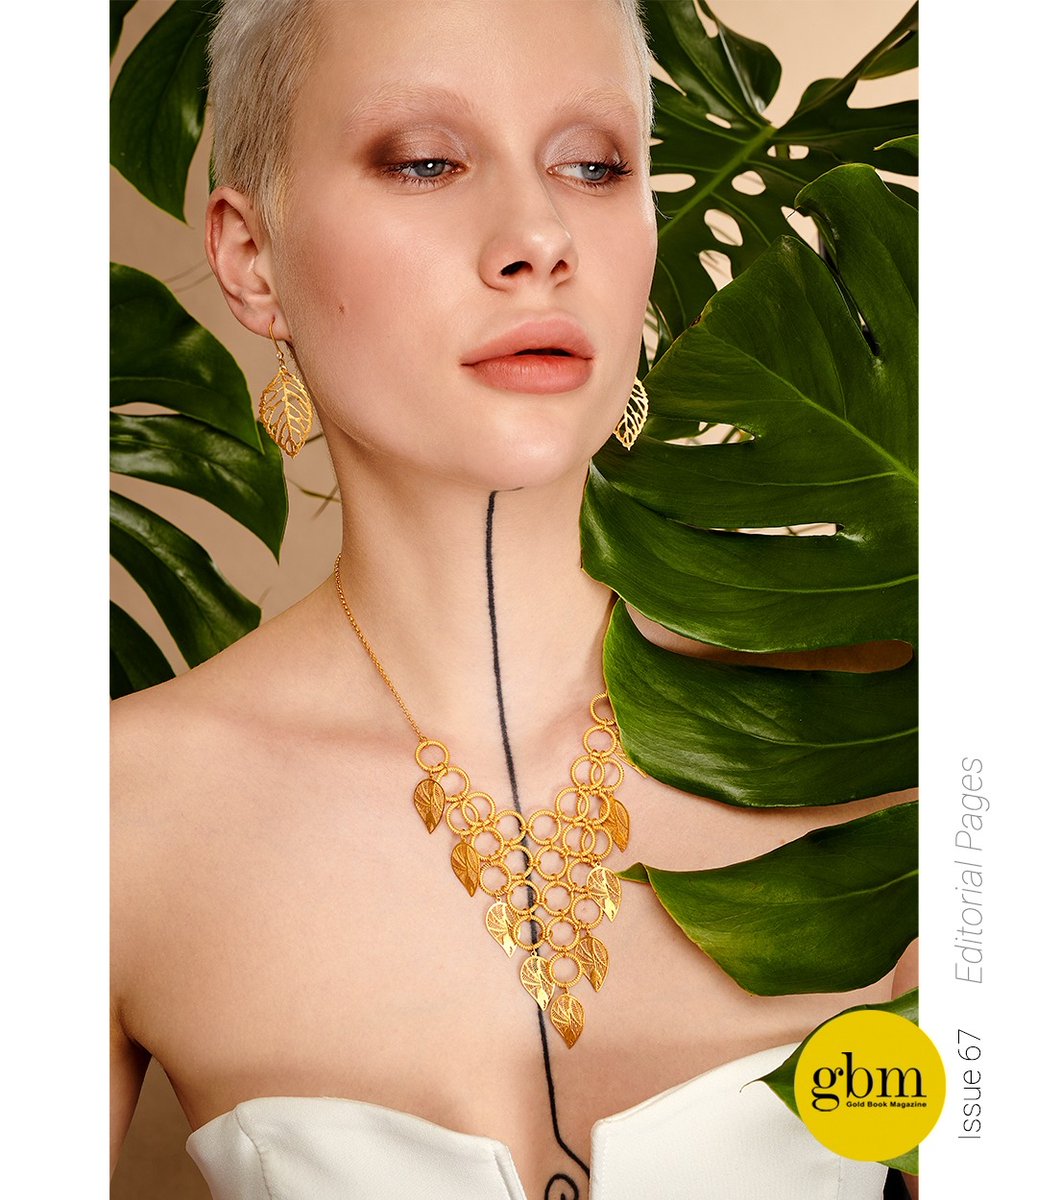 In 67th issue we made an editorial shoot representing the warmth of spring.
We share a beautiful image from this shoot with you.
.
.
.
#GoldBookMagazine #editorialshoot #image #consept #style
#jewelleryshoot #fashionshoot #67thissue #IstanbulJewelryShow